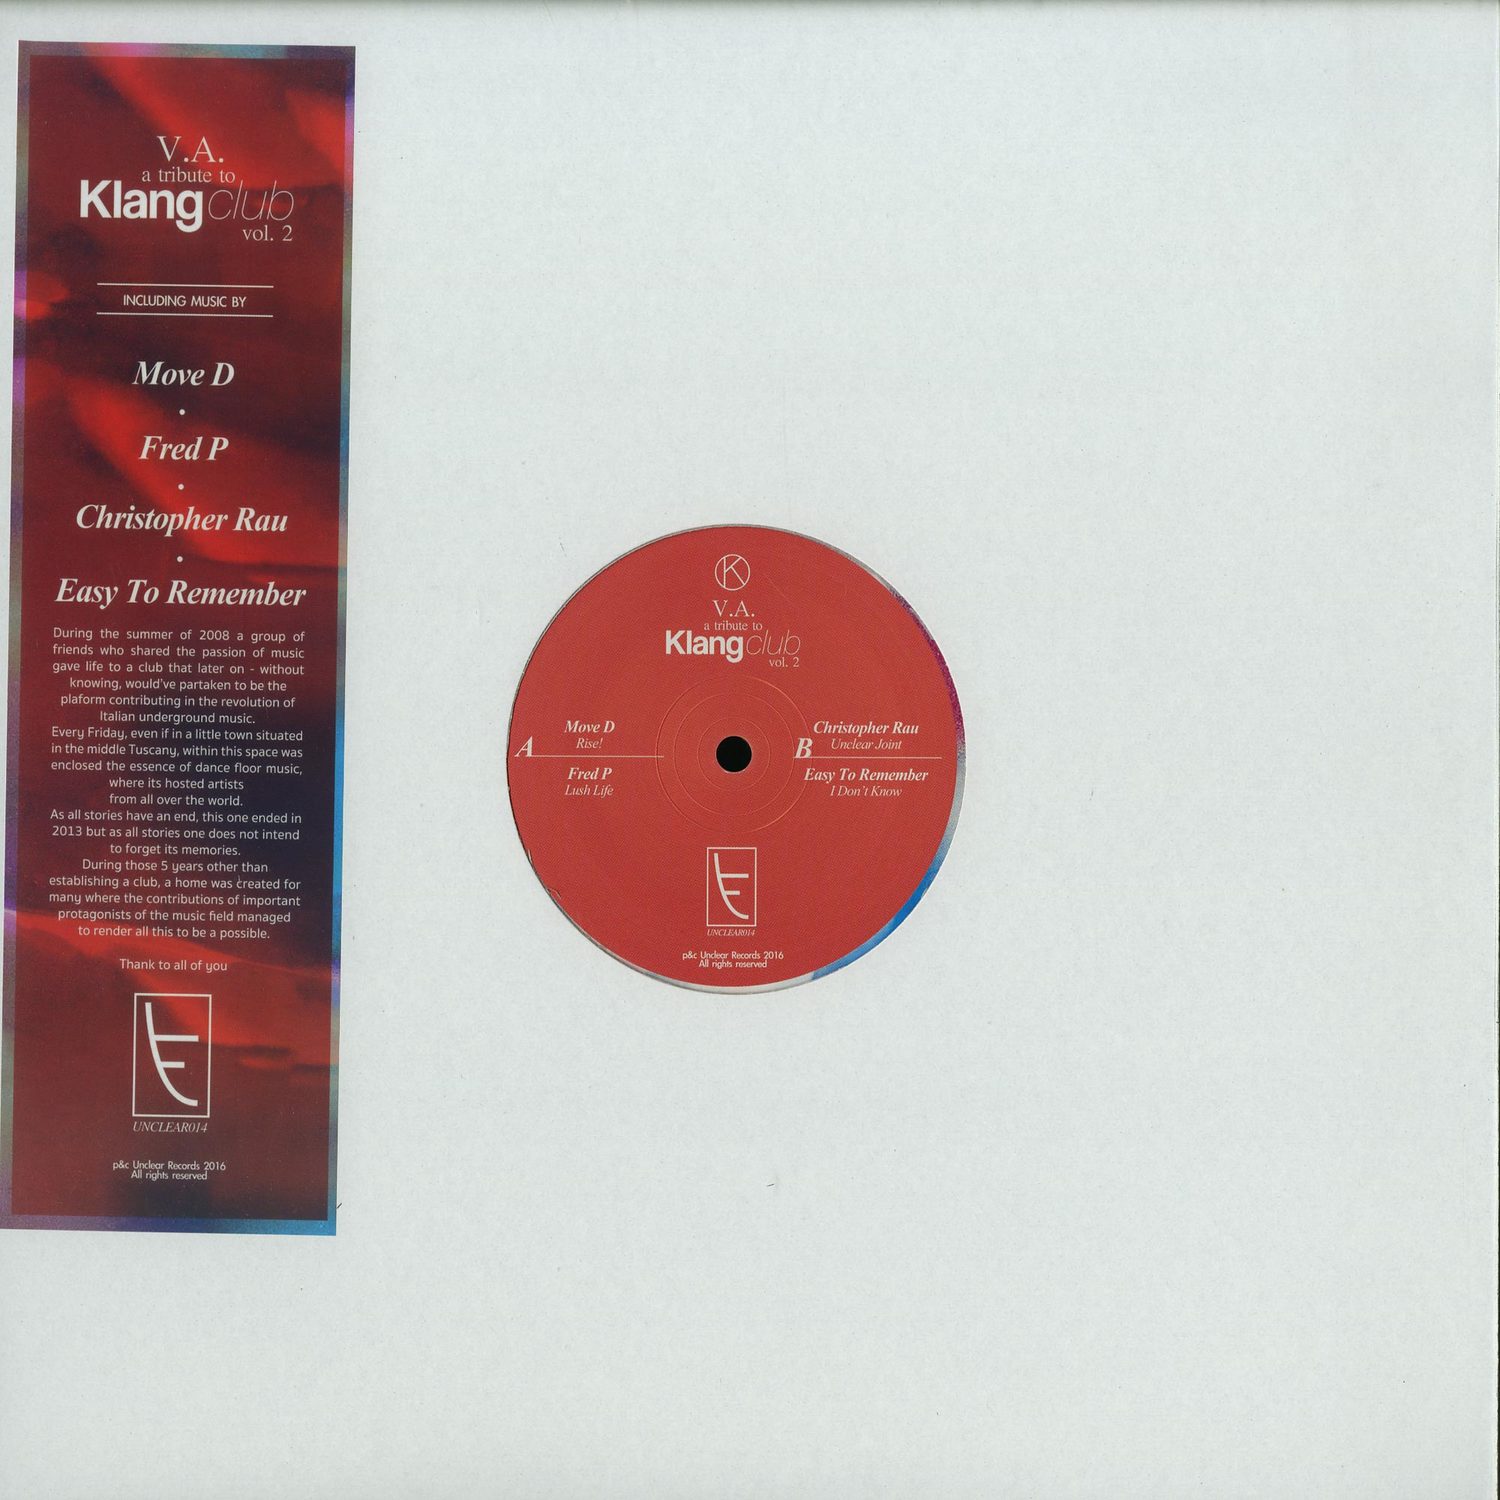 Move D, Fred P, Christoper Rau, Easy To Remember - A TRIBUTE TO KLANG CLUB VOL. 2